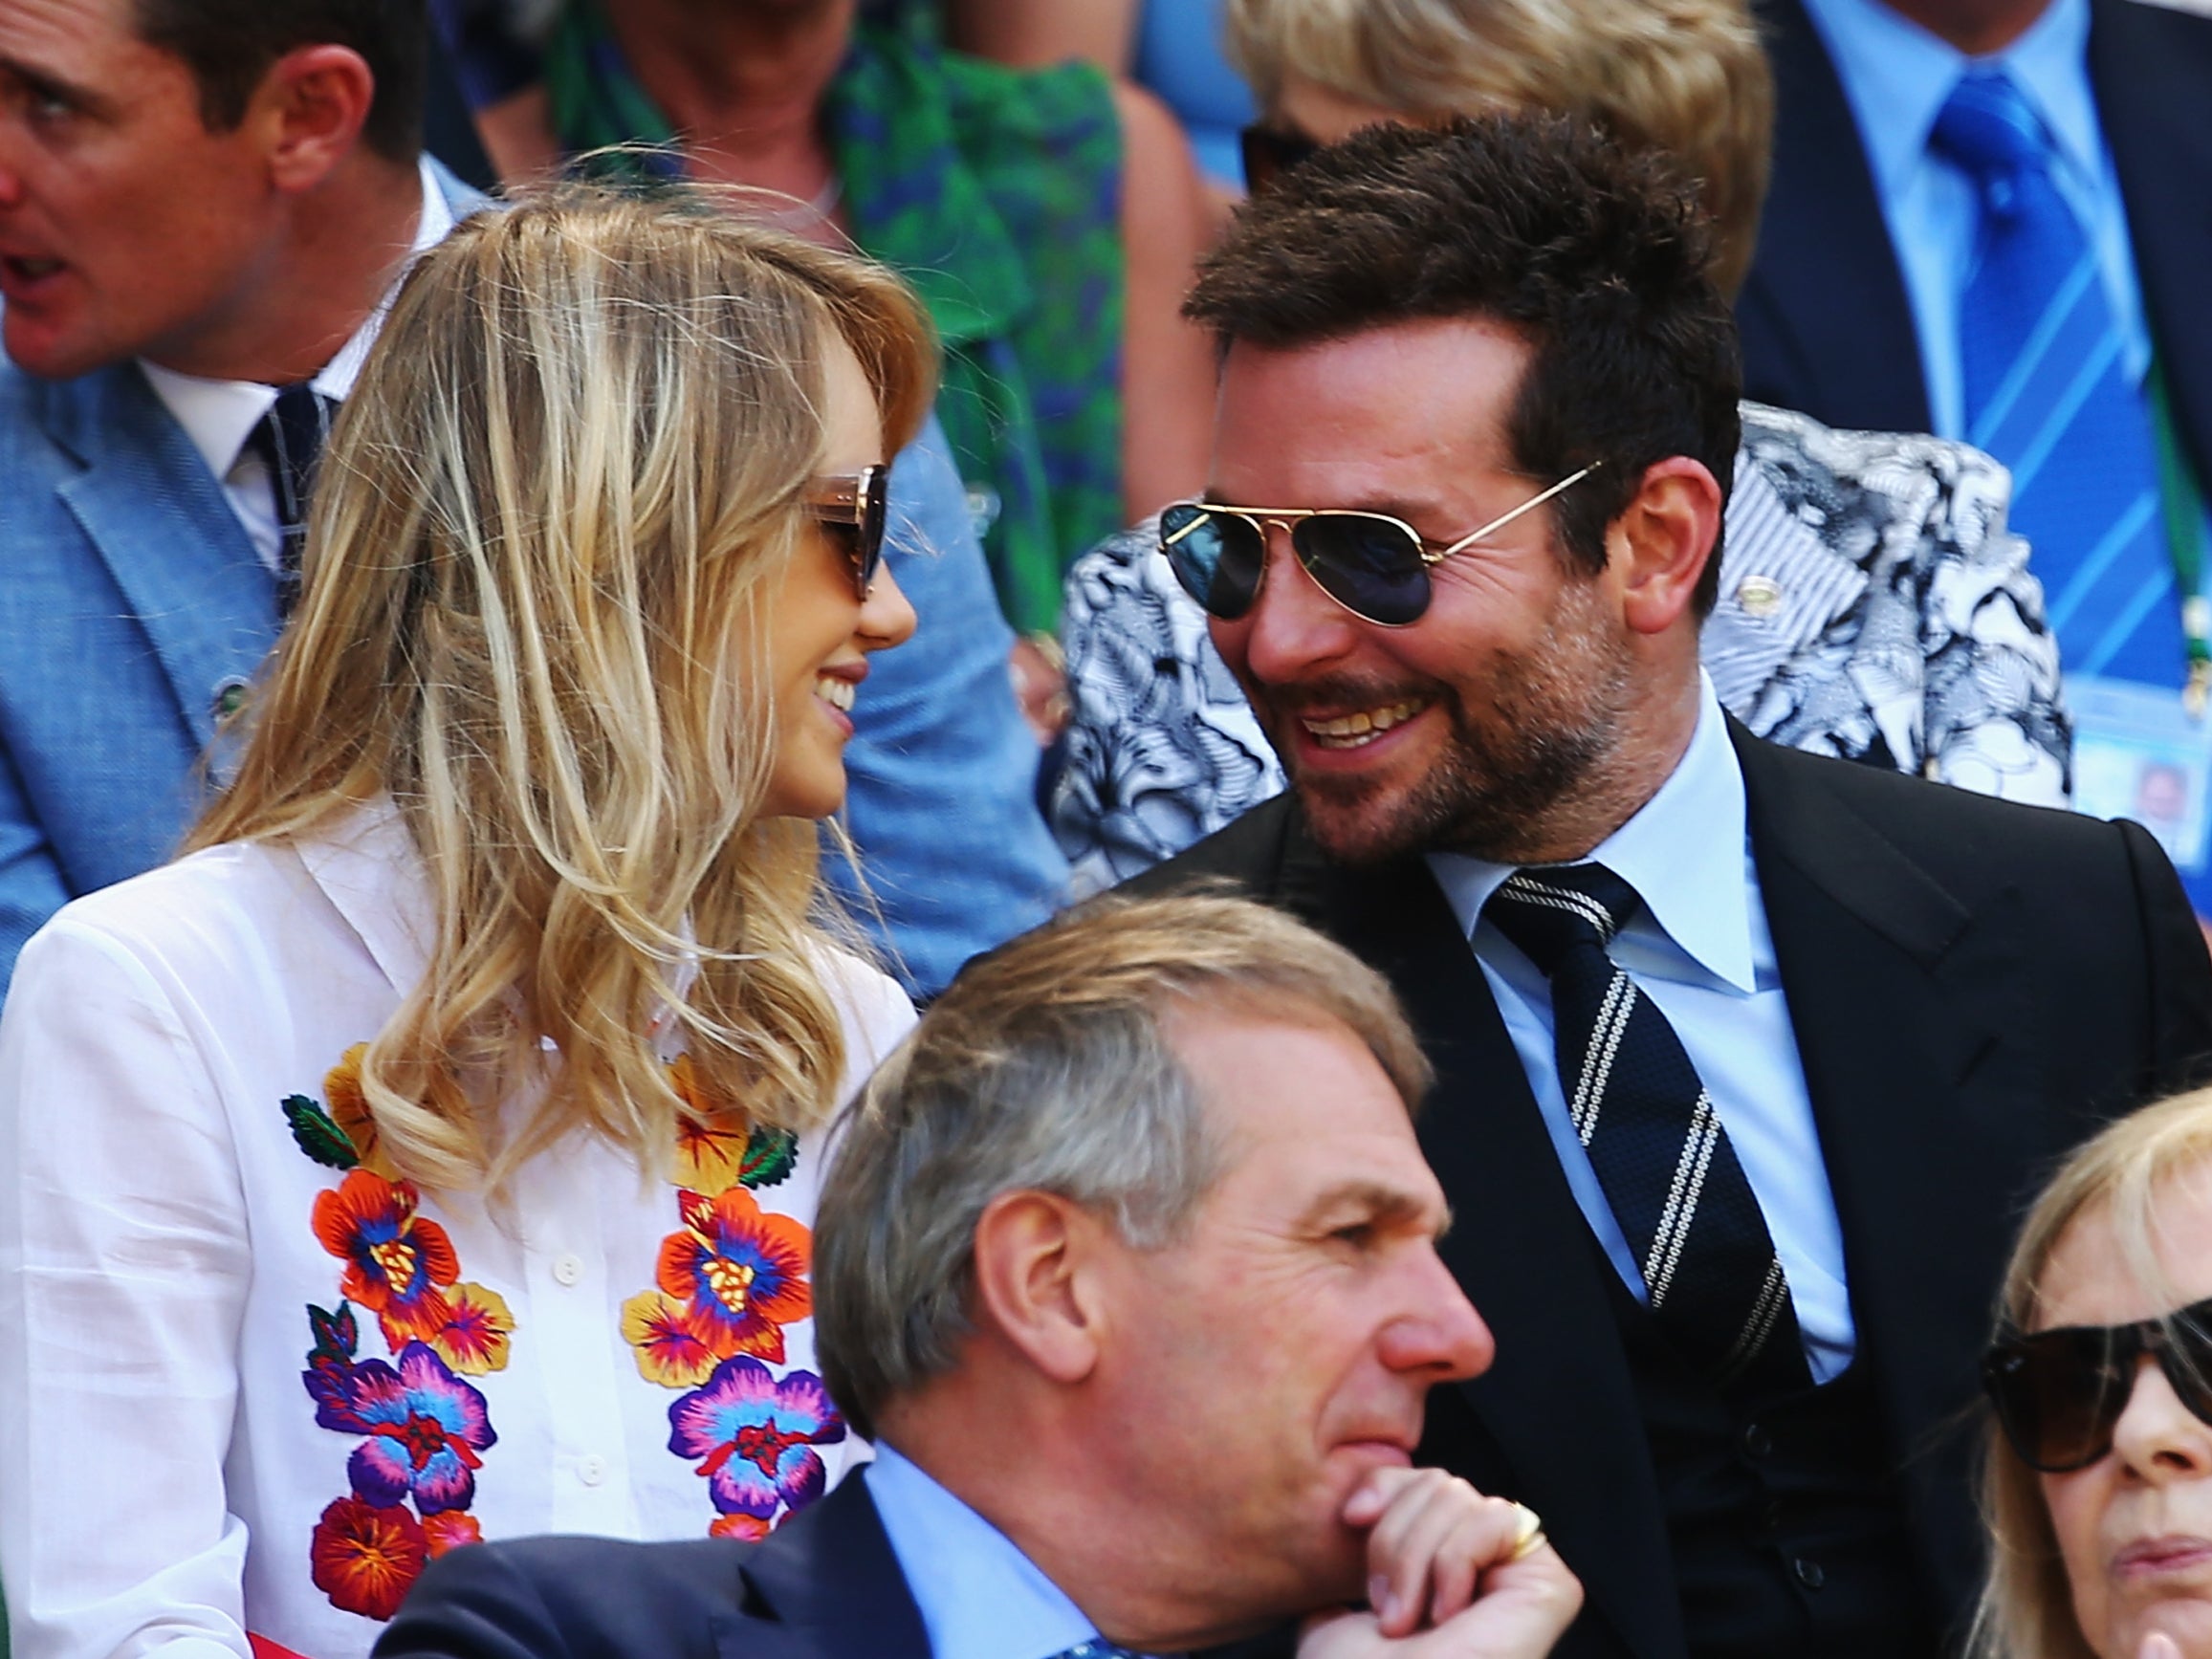 Suki Waterhouse and Bradley Cooper in the royal box at Wimbledon in 2014 in London. The singer spoke out in a new interview about their split